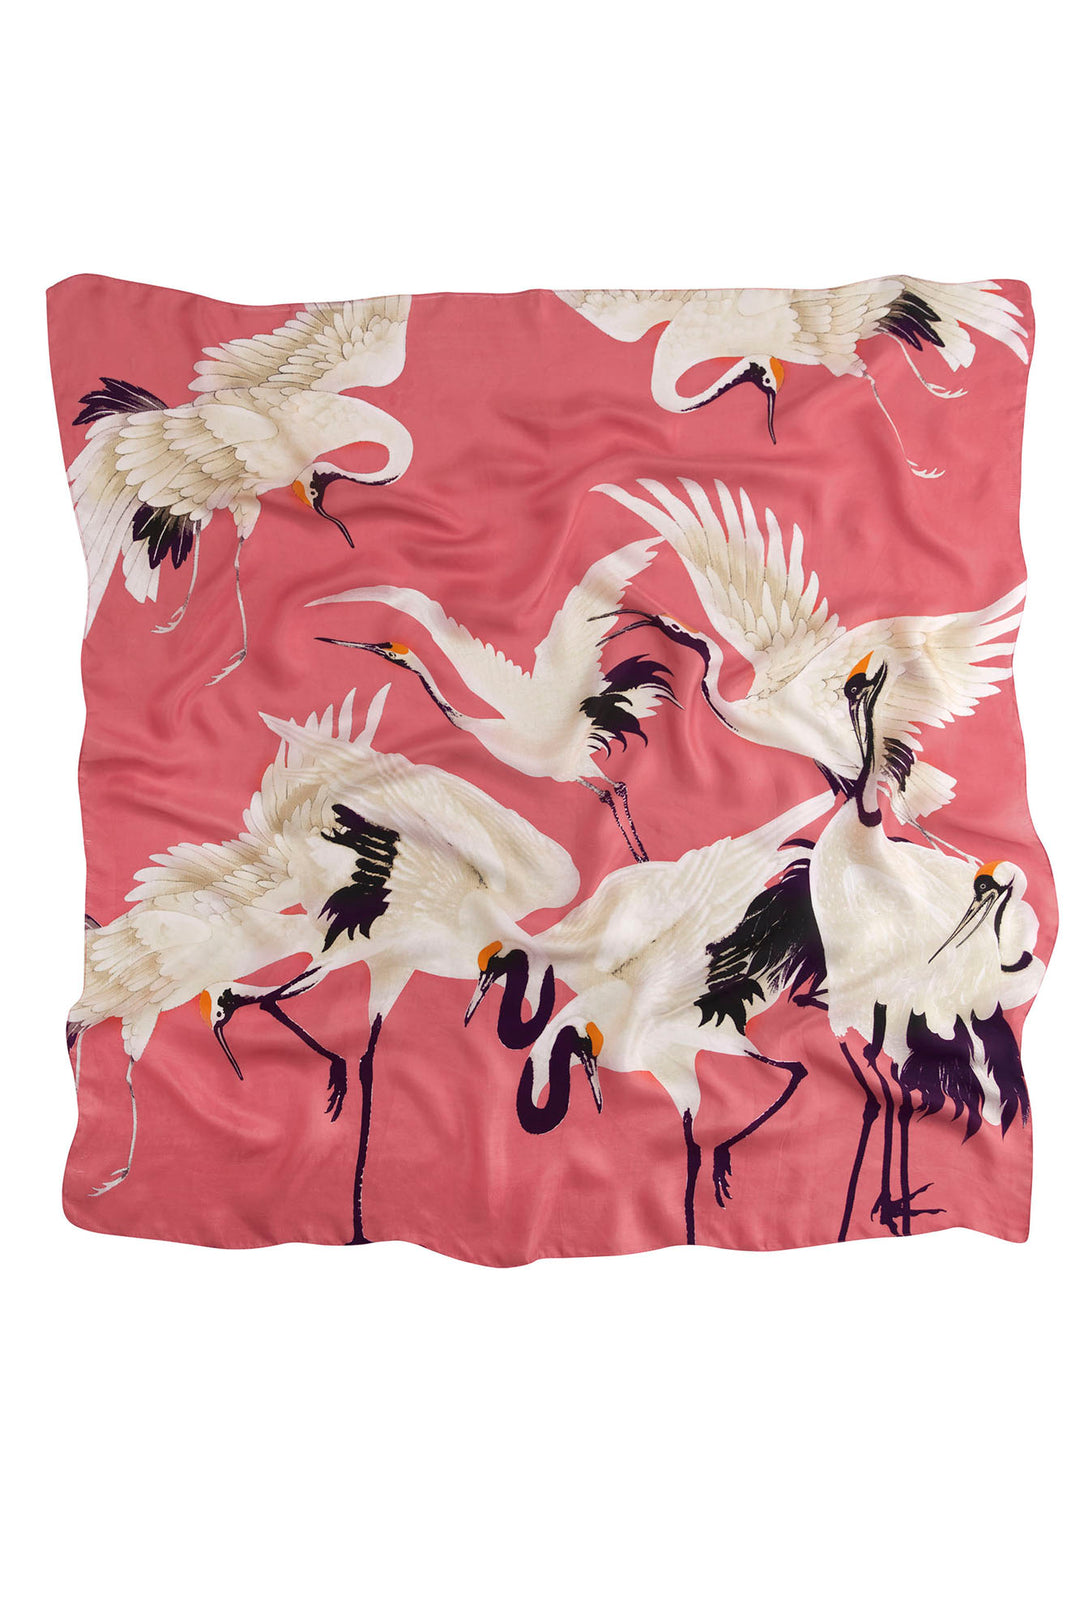 One Hundred Stars Stork Crane Lipstick Pink Silk Square Scarf - 100% silk, 100% hand screen printed and a whole 100cm x 100cm of print, this silk scarf oozes luxury whether you wear it knotted around your neck, as a headscarf or fastened around the handle of your favourite handbag.